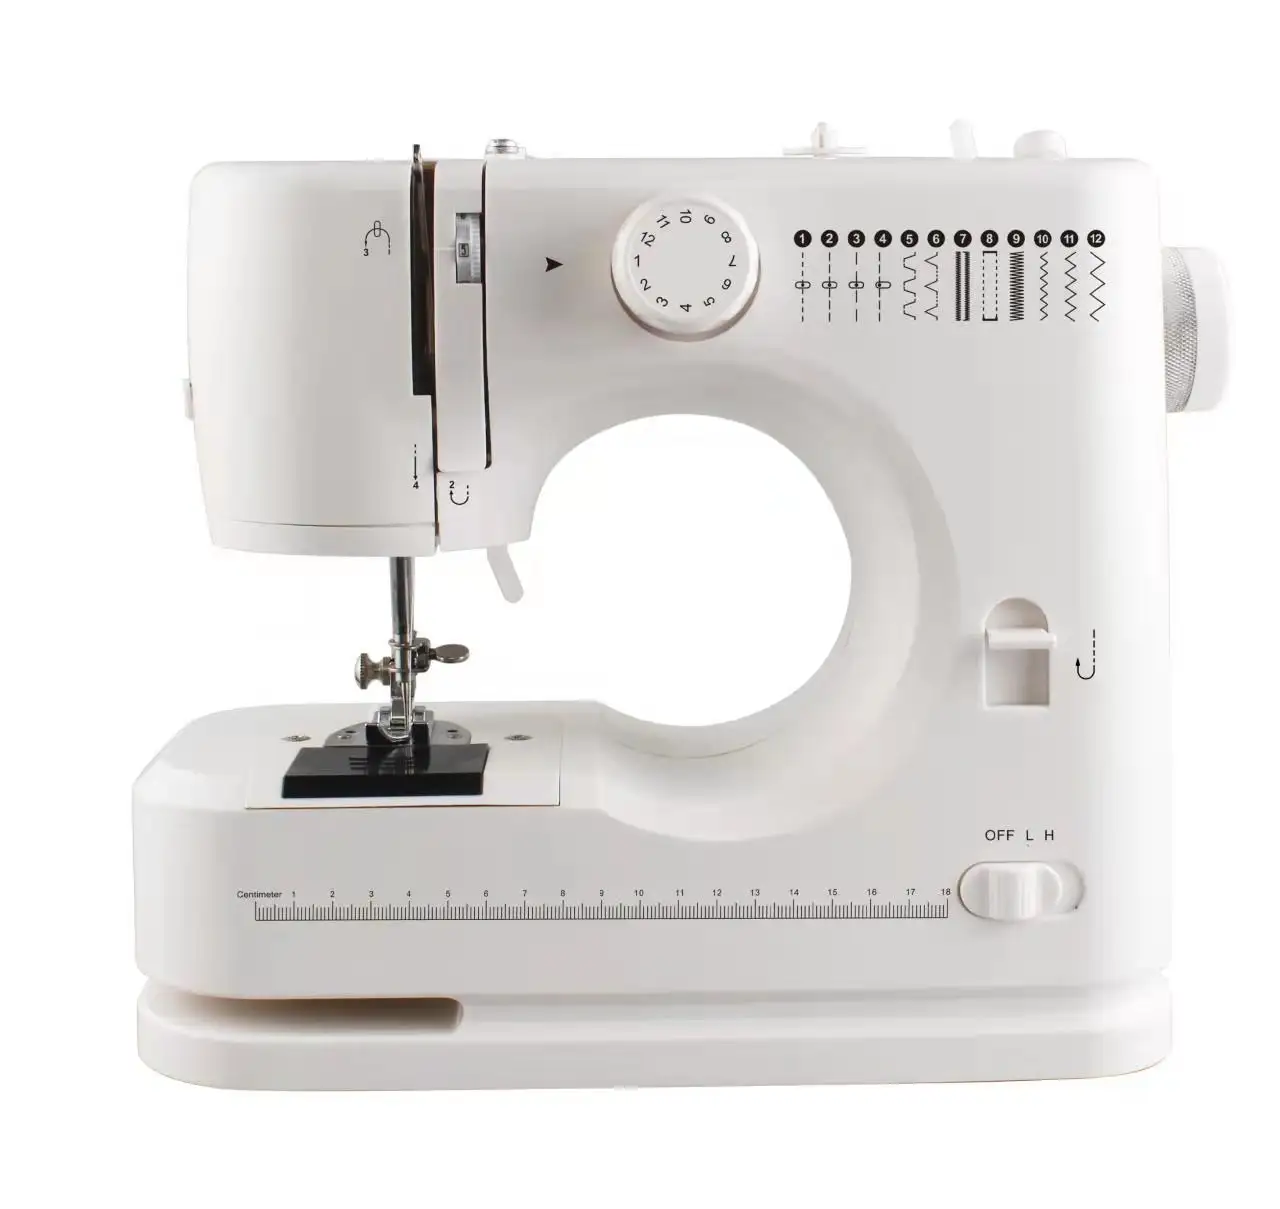 New Design FHSM-520 Electric Household Overlock Sewing Machine With Buttonhole Maquina De Coser